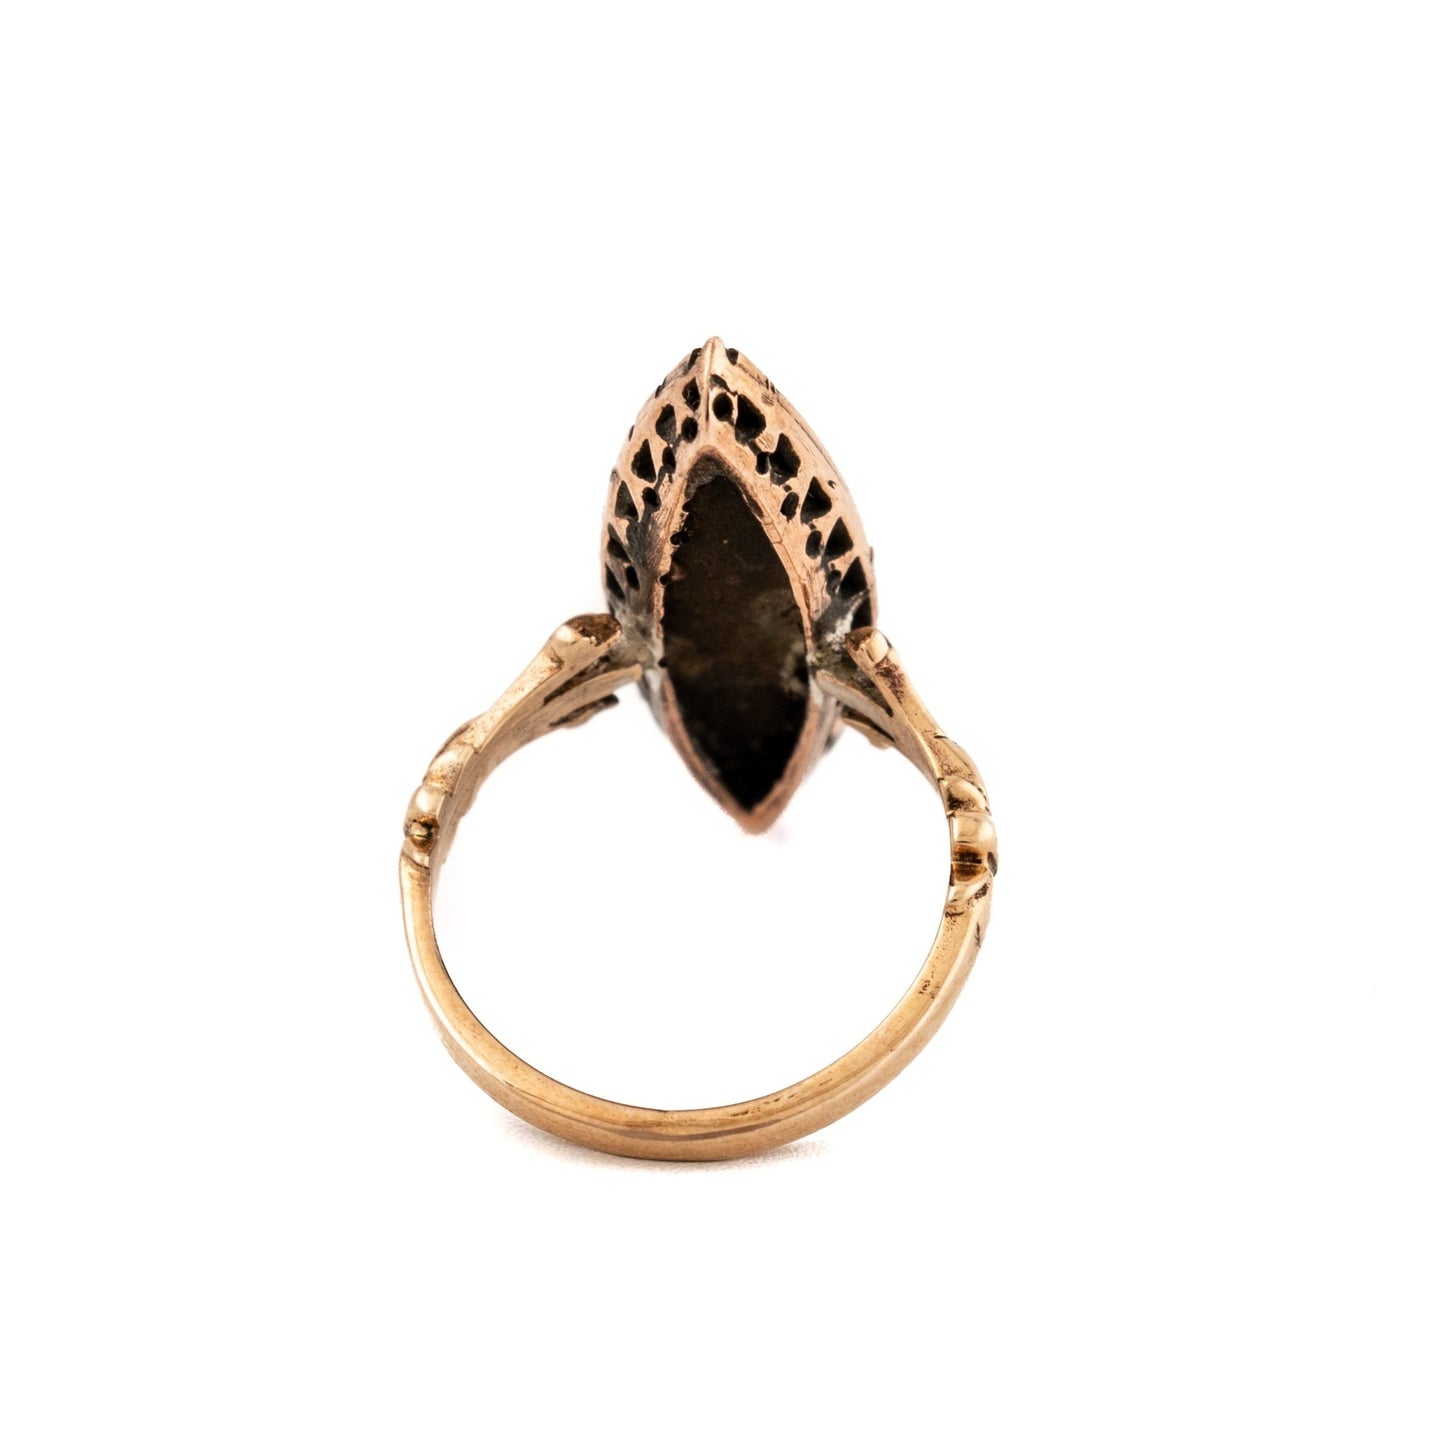 Antique Pinchbeck Ring - Kingdom Jewelry